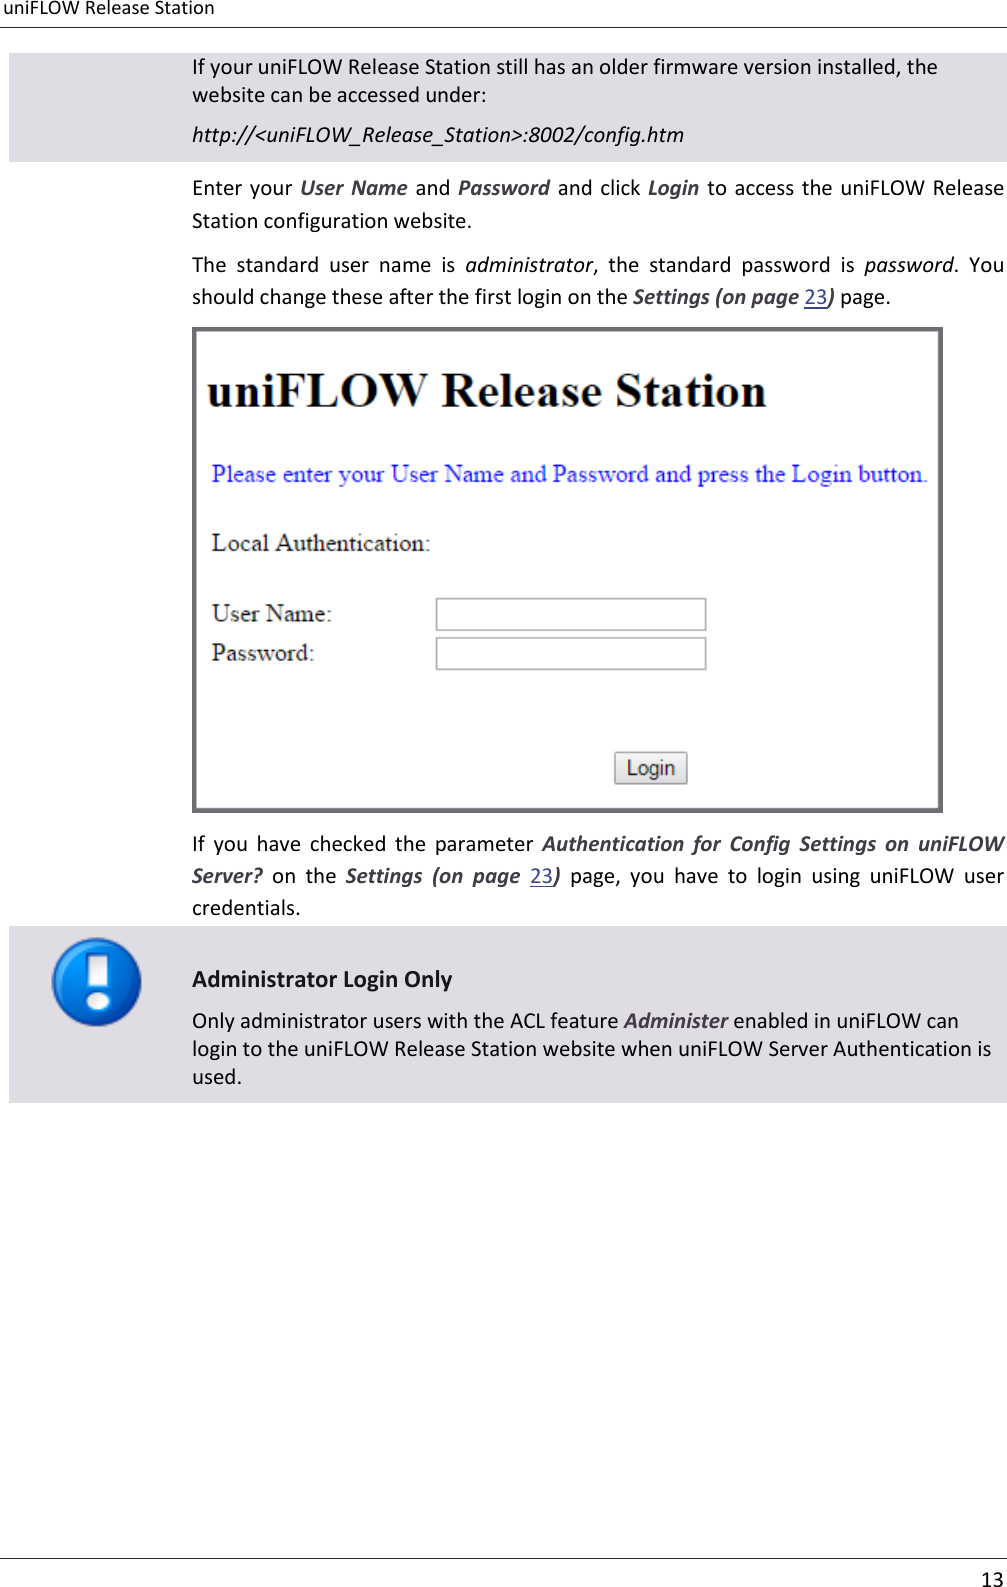 uniFLOW Release Station     13  If your uniFLOW Release Station still has an older firmware version installed, the website can be accessed under: http://&lt;uniFLOW_Release_Station&gt;:8002/config.htm Enter your User Name  and Password and click Login  to  access the uniFLOW Release Station configuration website.   The  standard  user  name  is  administrator,  the  standard  password  is  password.  You should change these after the first login on the Settings (on page 23) page.  If  you  have  checked  the  parameter  Authentication  for  Config  Settings  on  uniFLOW Server?  on  the  Settings  (on  page  23)  page,  you  have  to  login  using  uniFLOW  user credentials.  Administrator Login Only Only administrator users with the ACL feature Administer enabled in uniFLOW can login to the uniFLOW Release Station website when uniFLOW Server Authentication is used. 